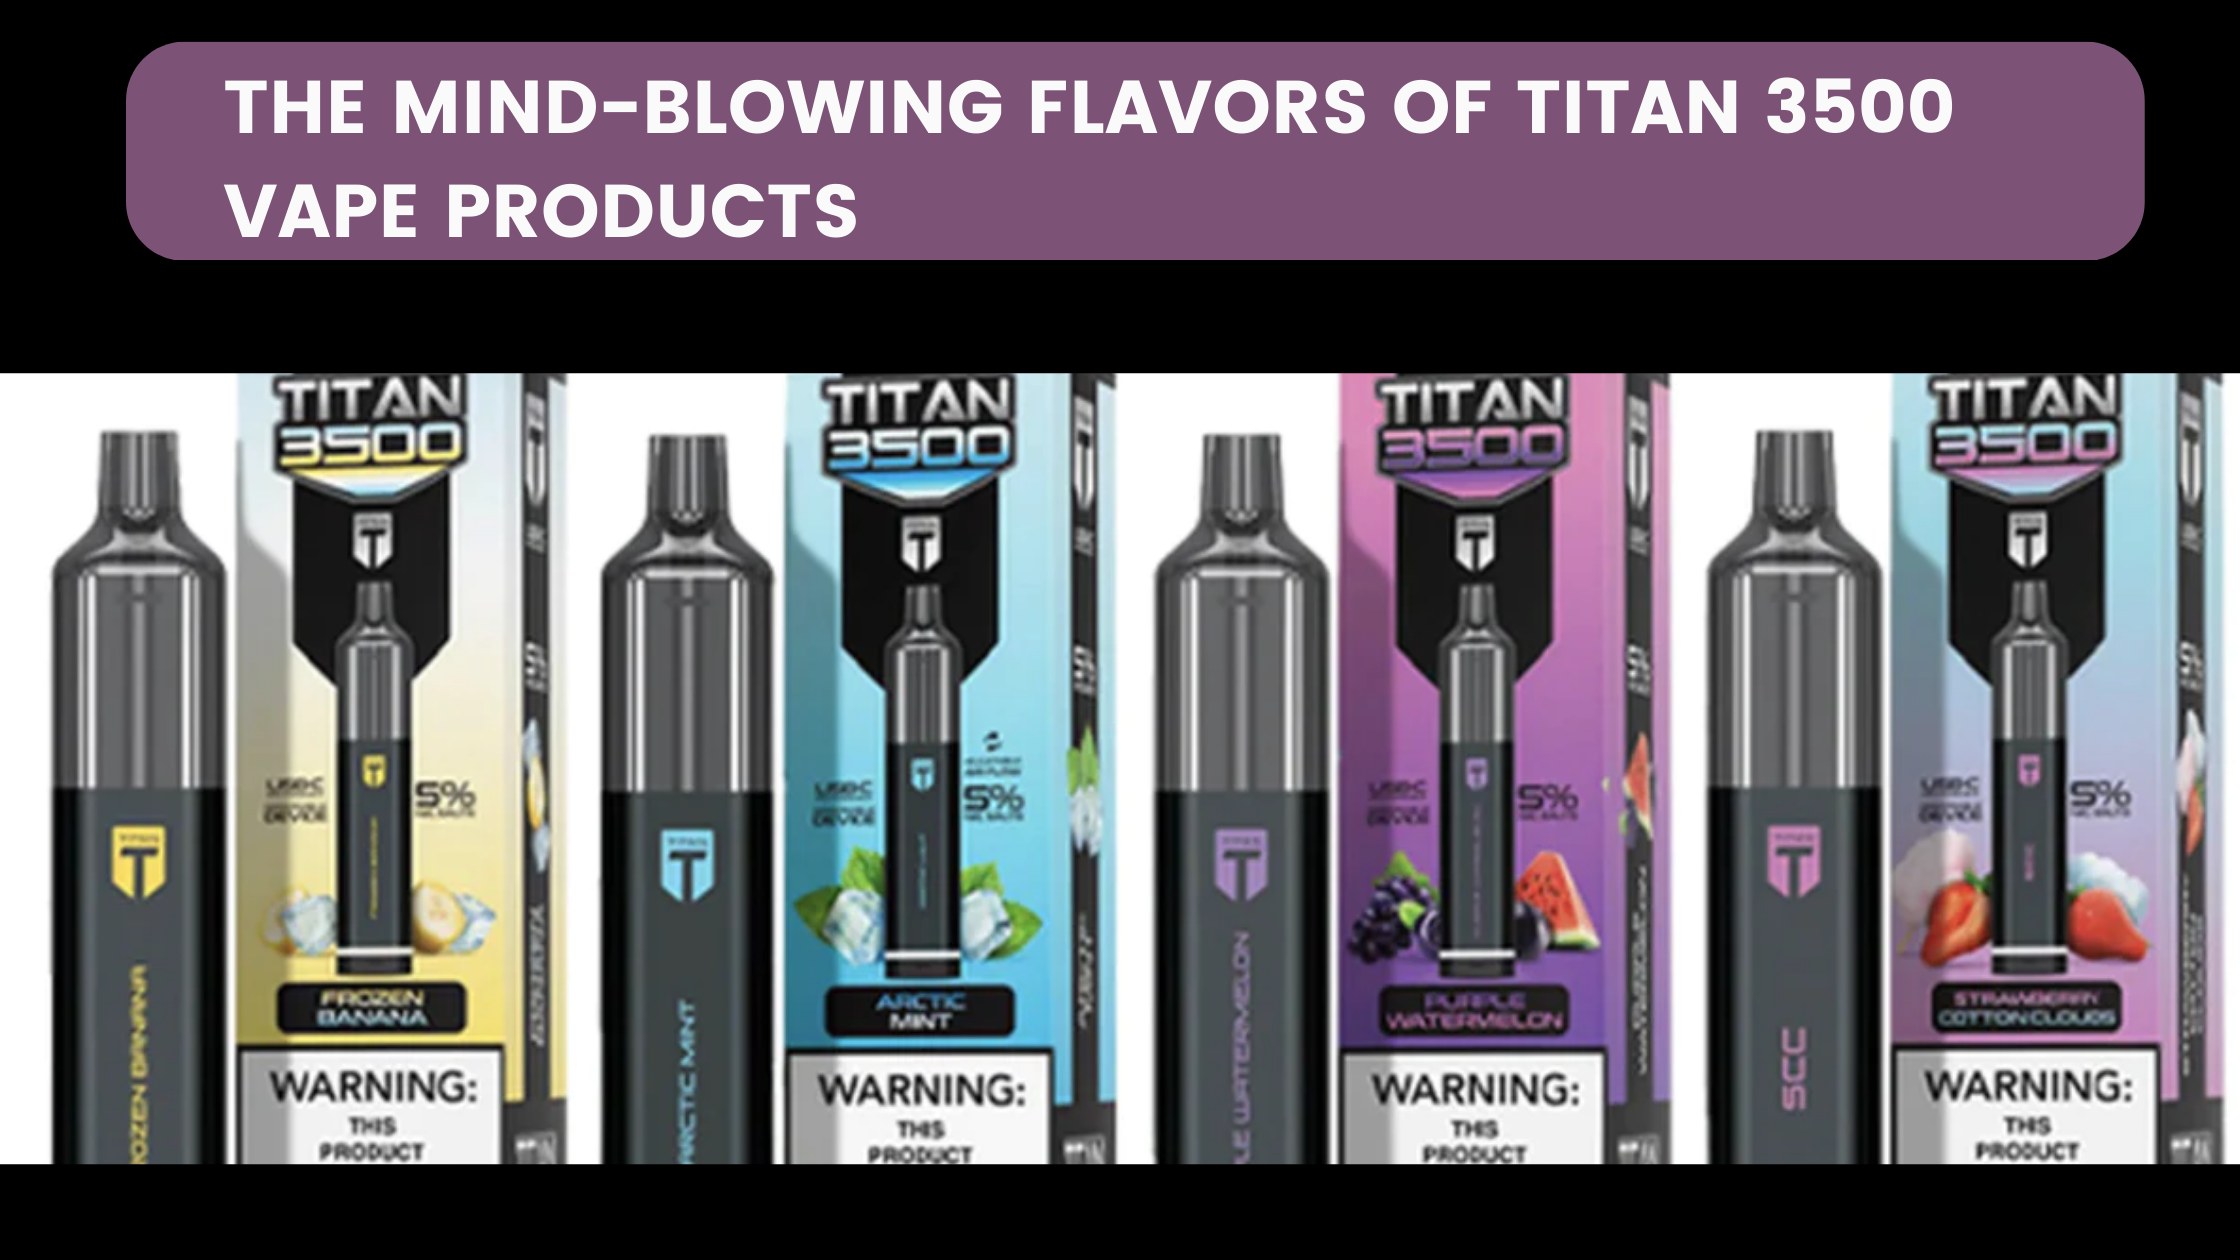 The Mind-Blowing Flavors of Titan 3500 Vape Products